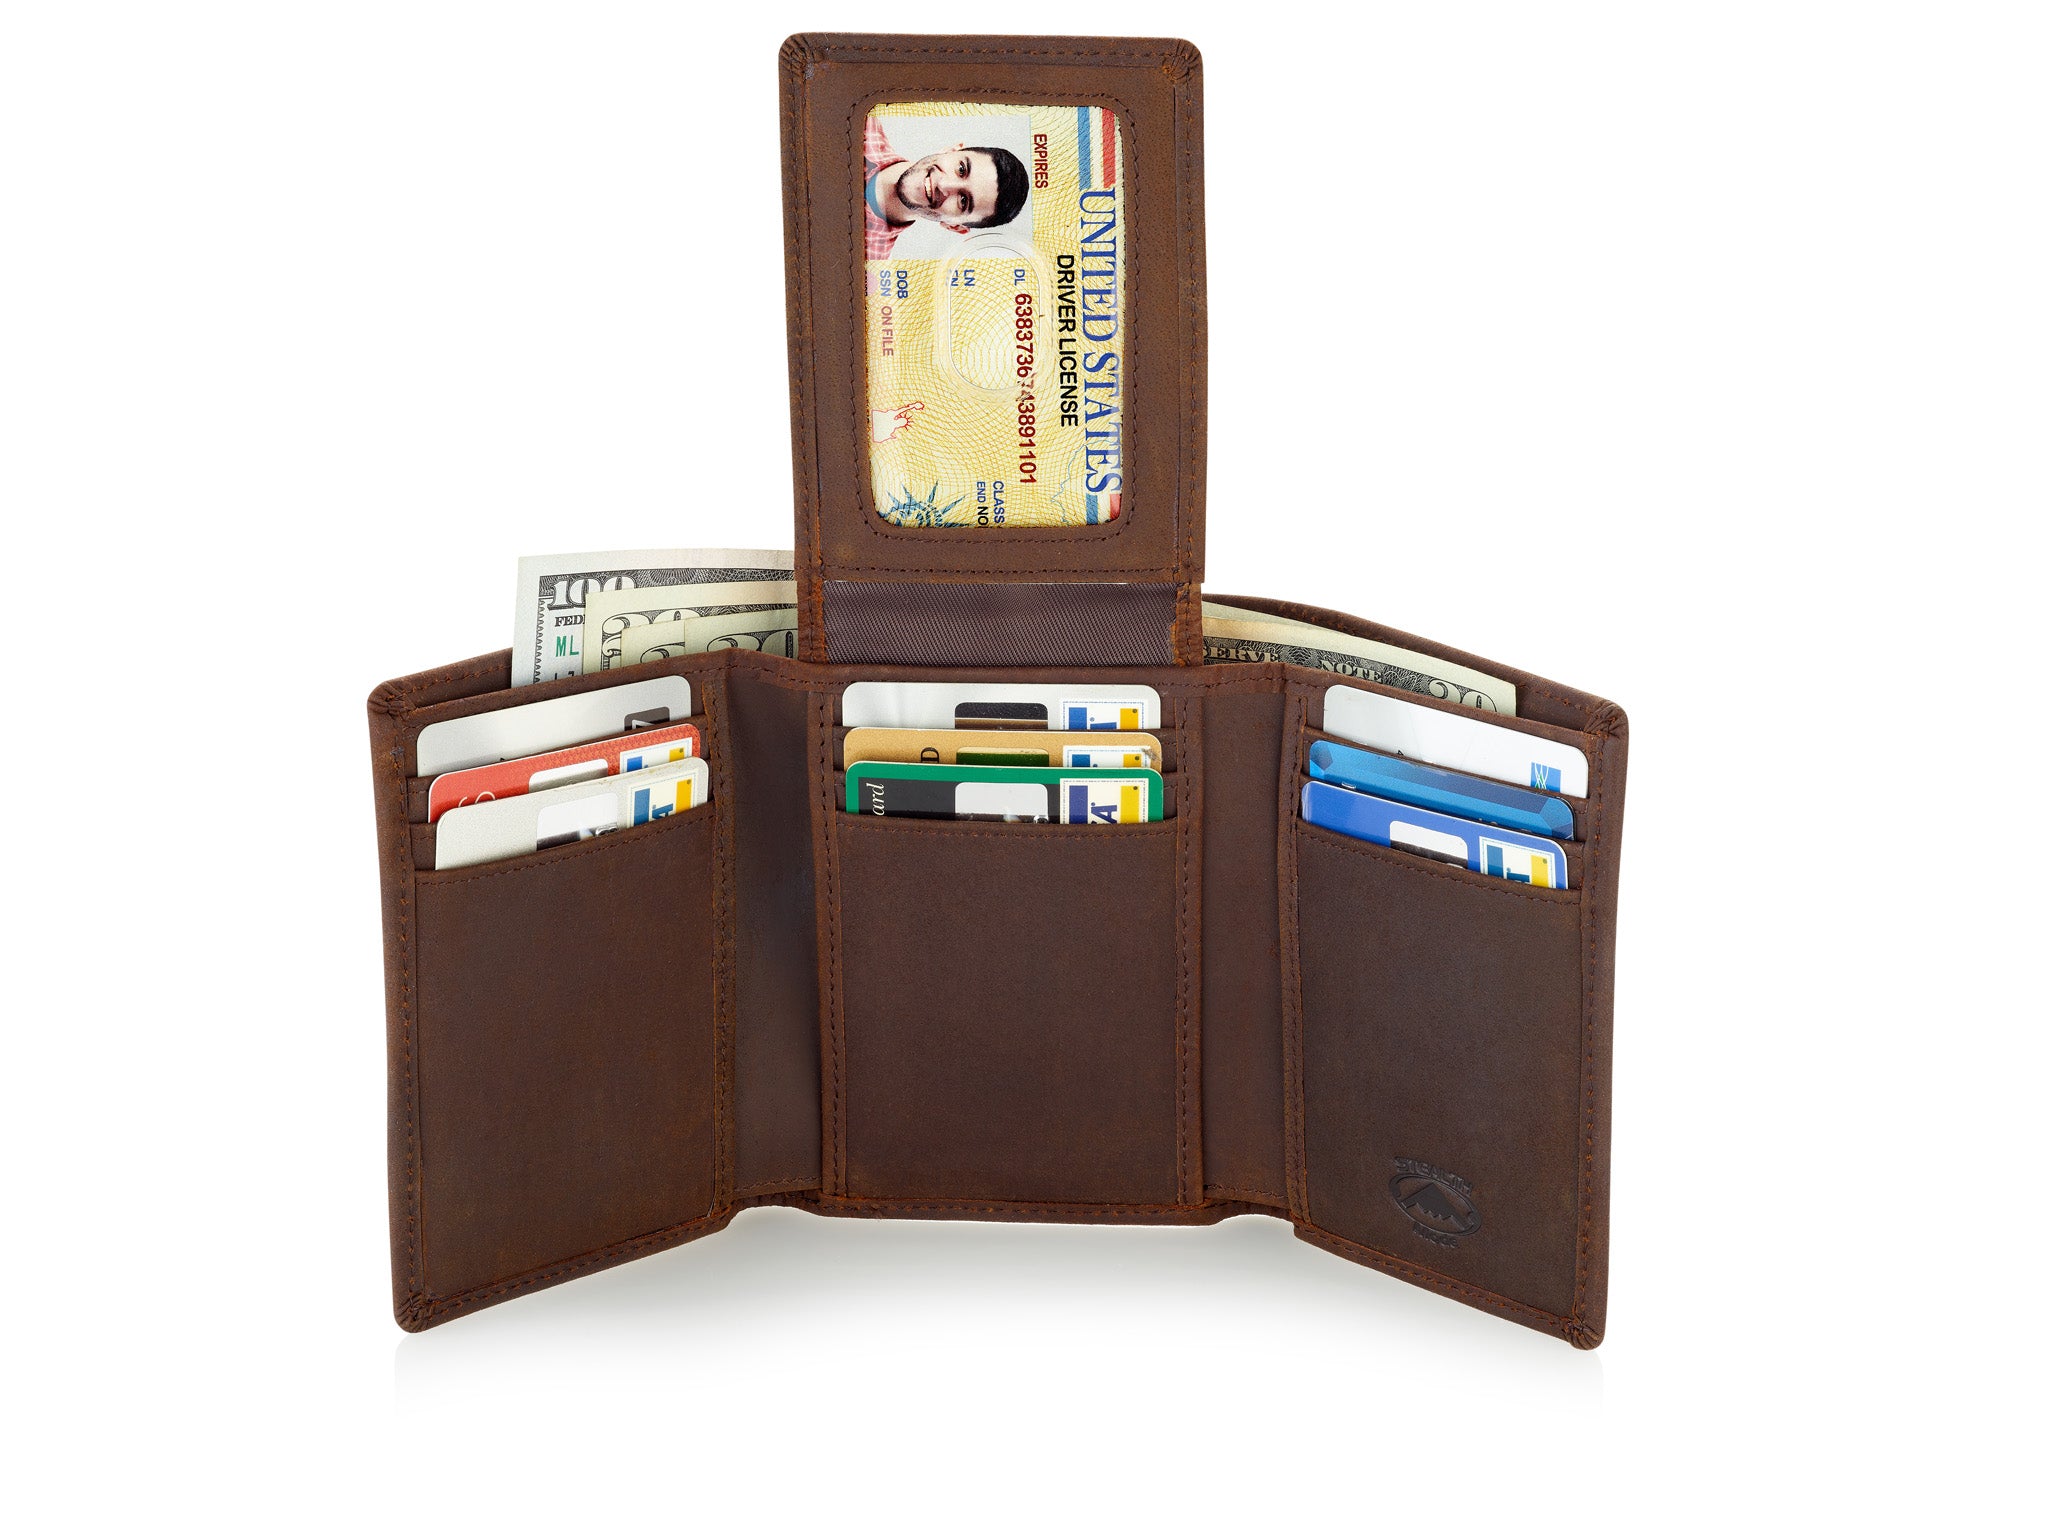 Trifold Leather Wallet for Men with ID Holder and RFID Blocking (Brown)